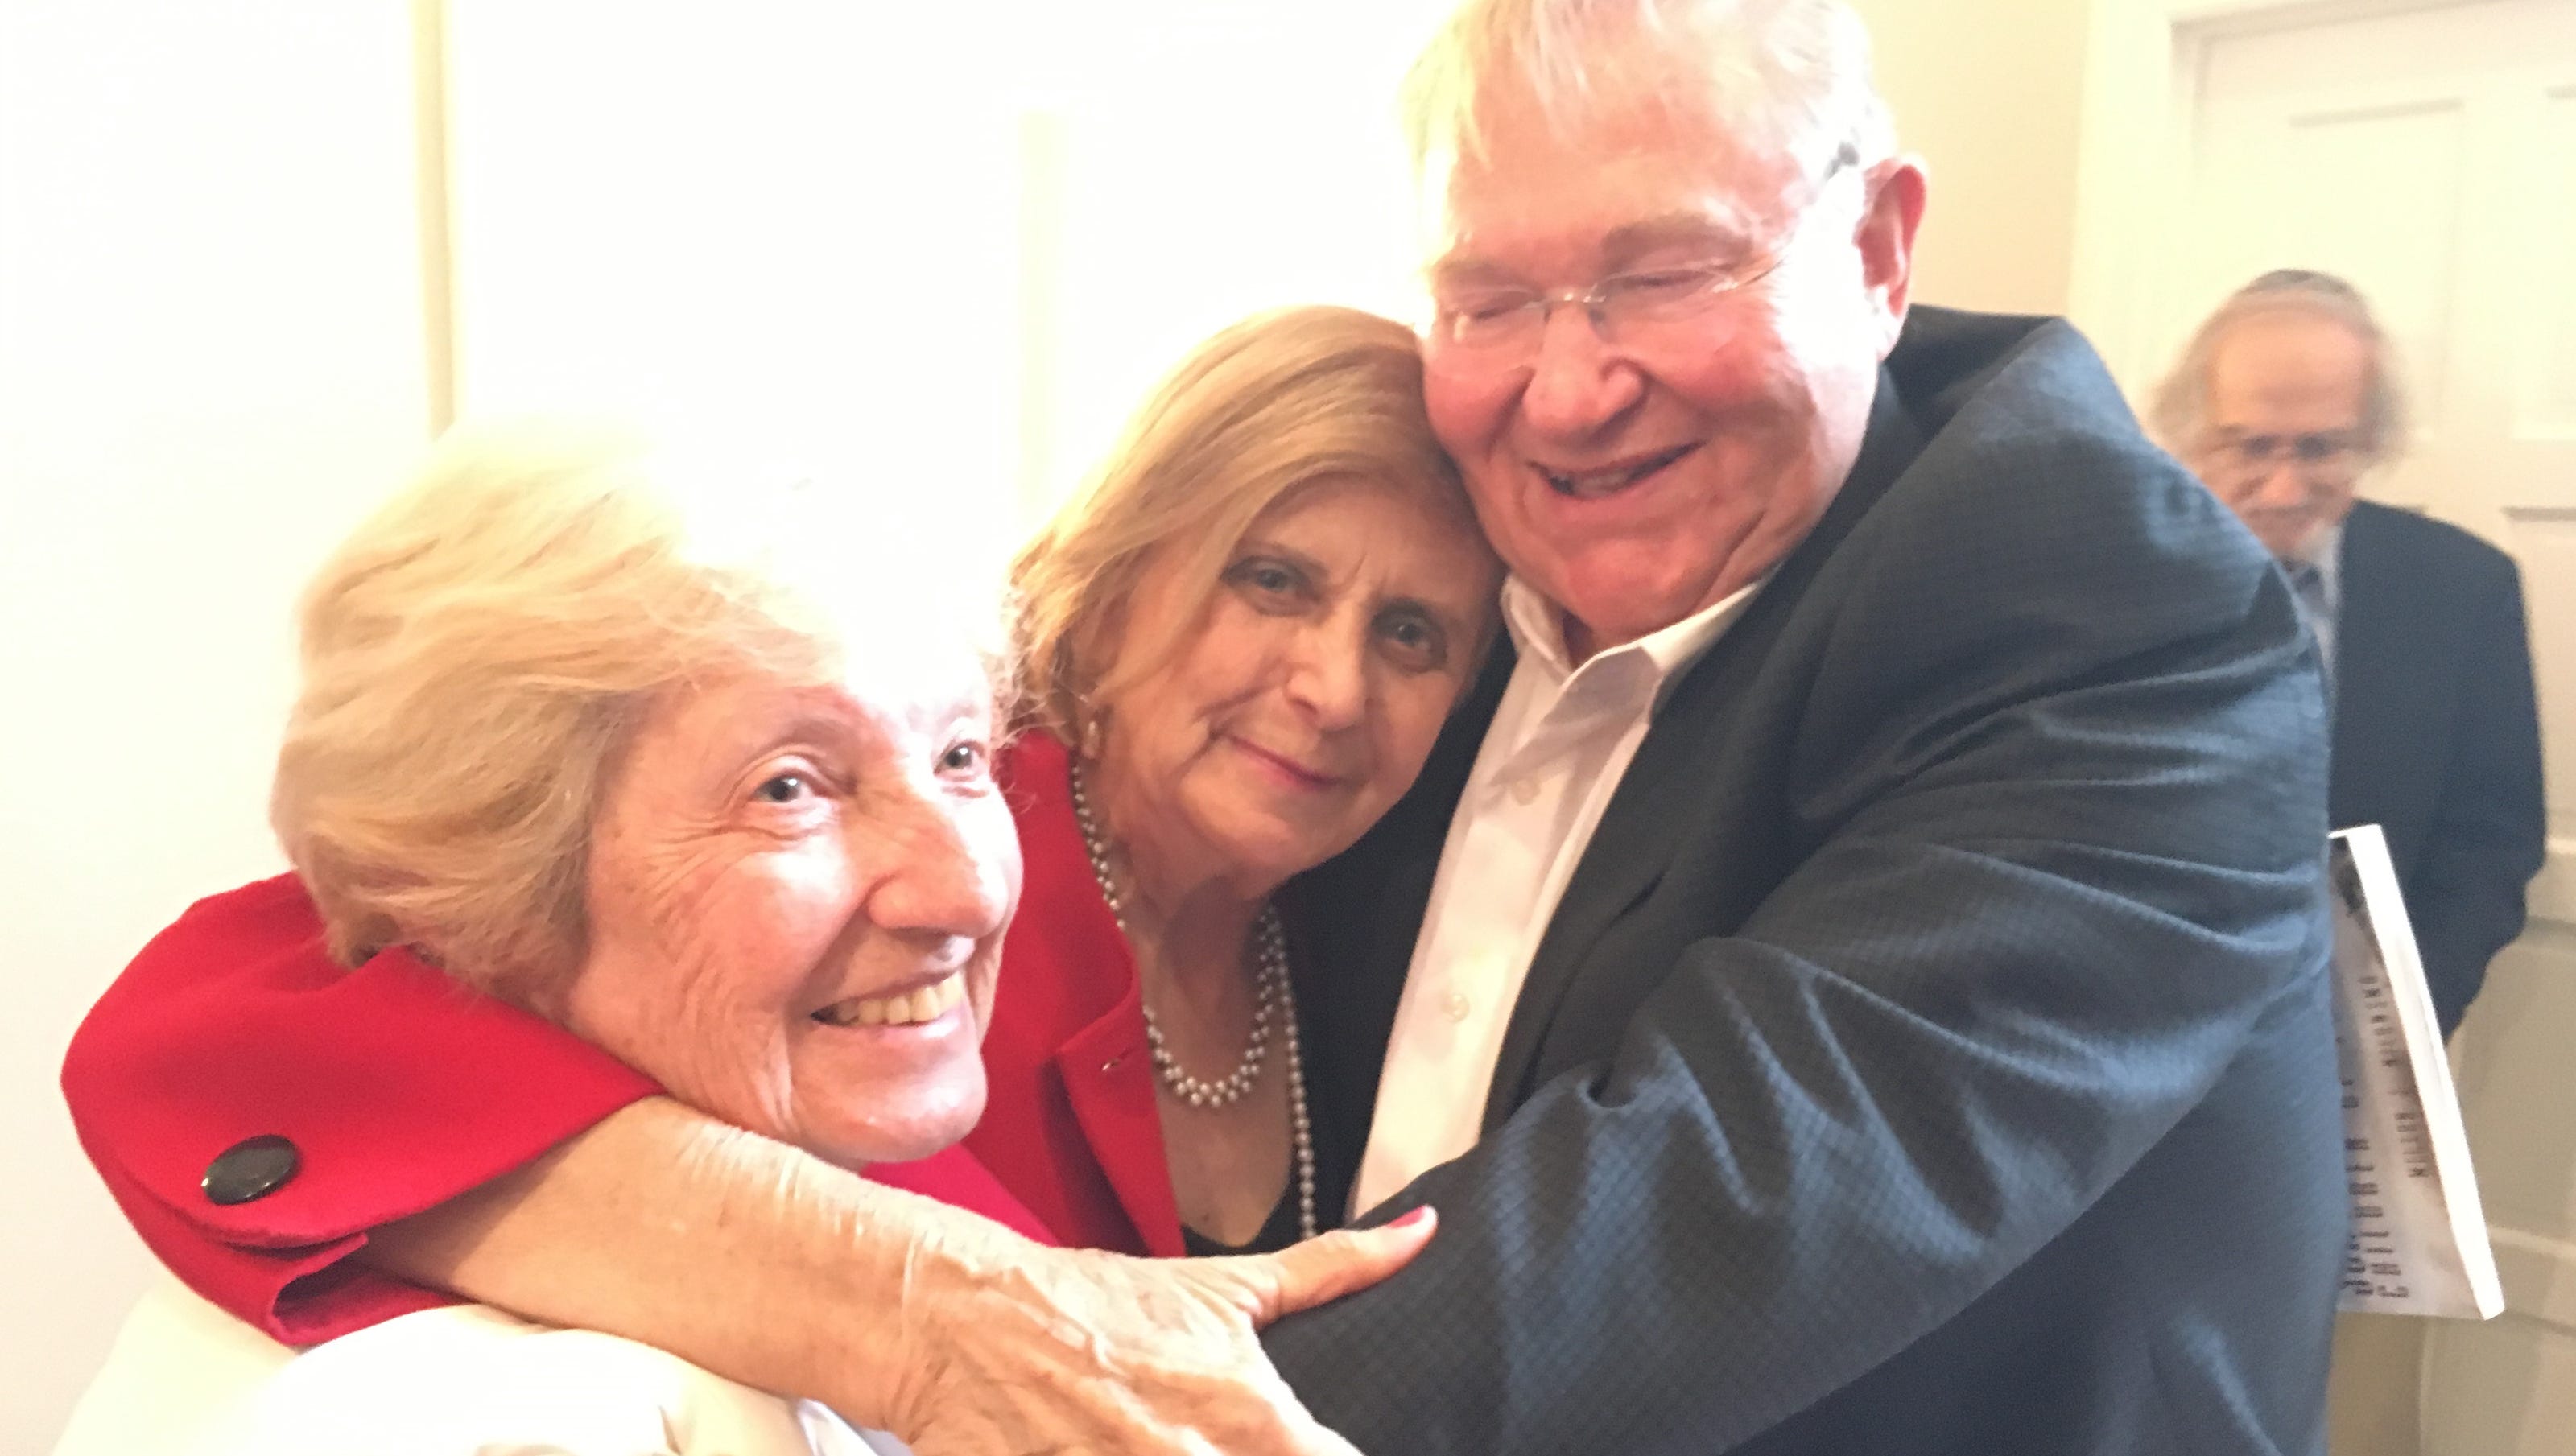 Photo of Holocaust survivors leads to reunion 72 years later